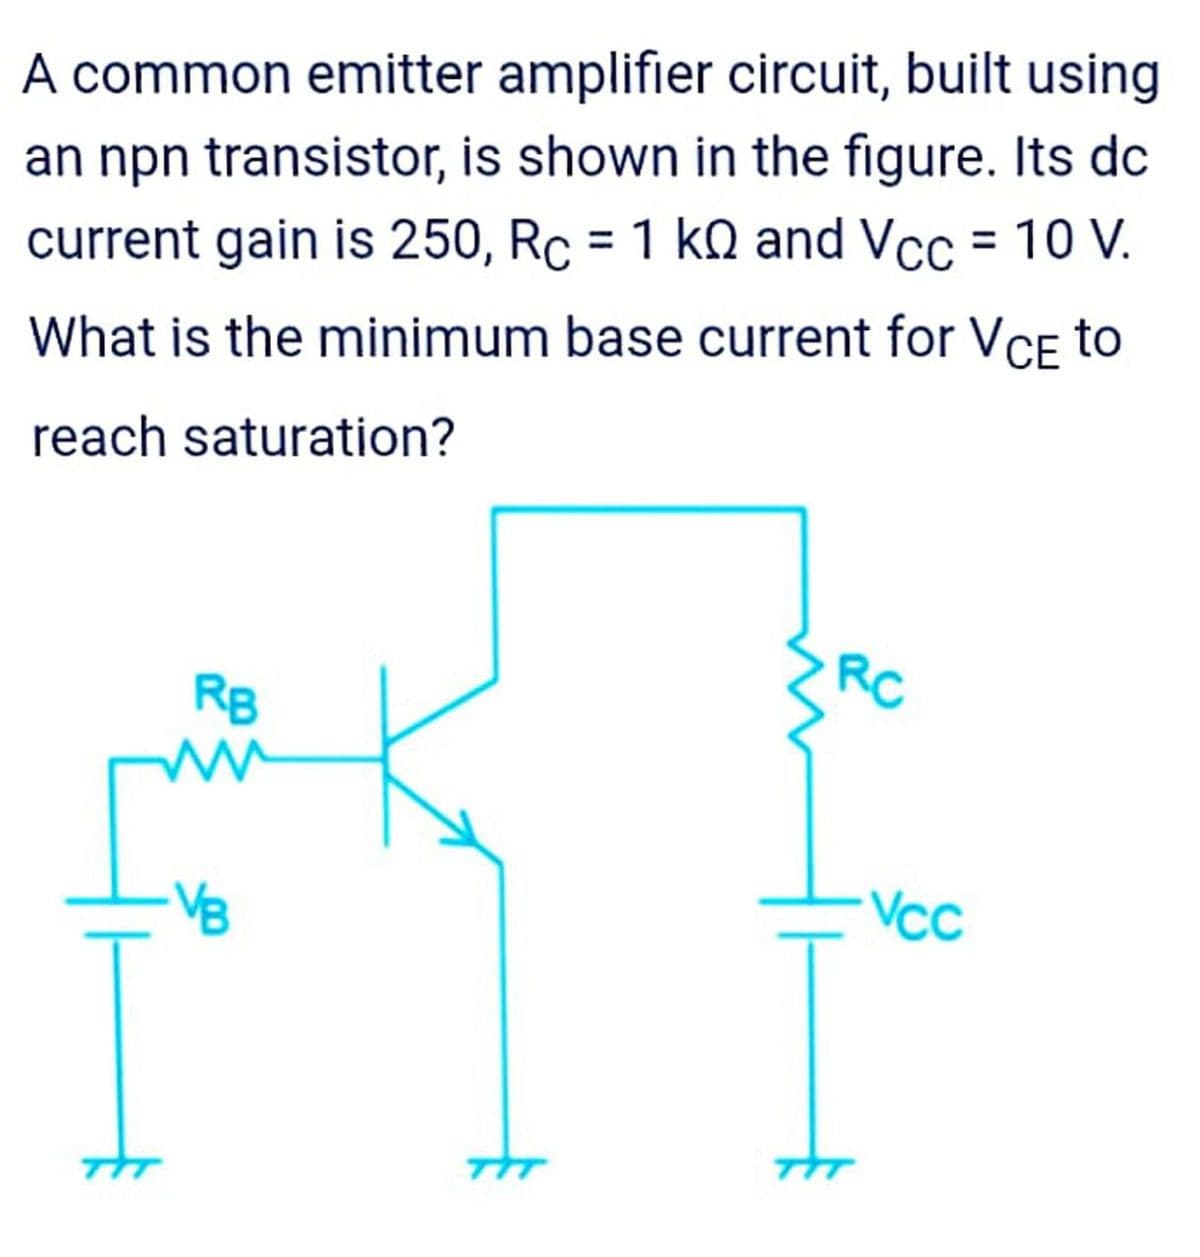 A common emitter amplifier circuit, built using
an npn transistor, is shown in the figure. Its dc
current gain is 250, Rc = 1 kn and Vcc = 10 V.
%3D
%D
What is the minimum base current for VCE to
reach saturation?
RB
RC
VB
Vcc
